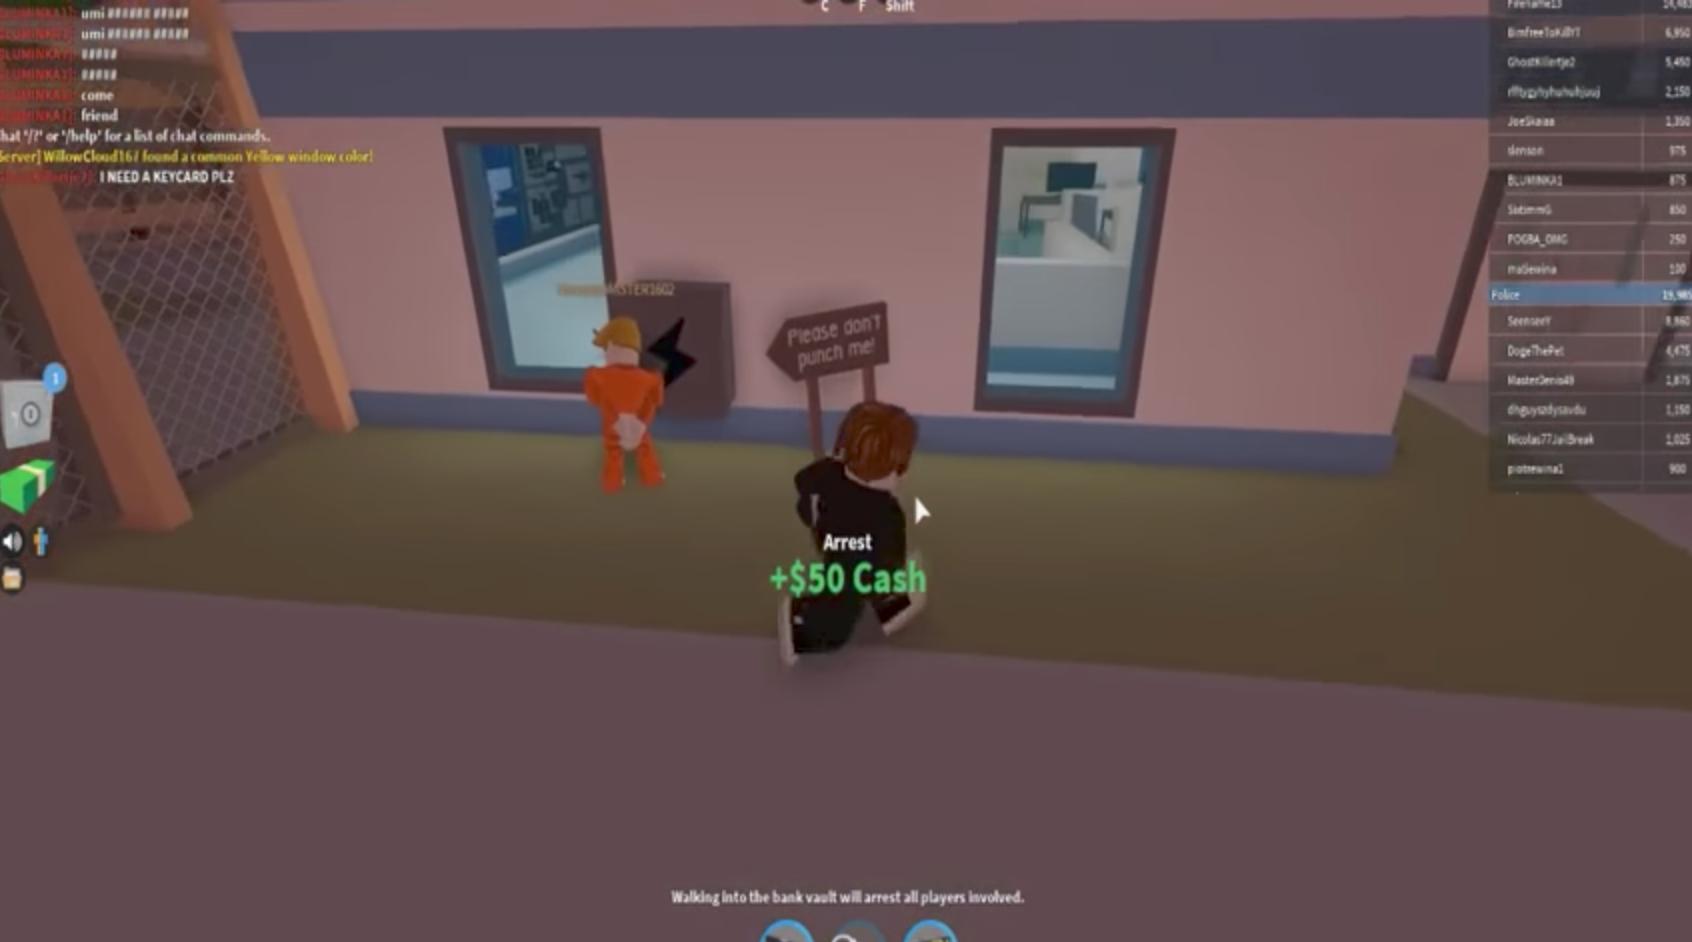 Tips Of Roblox Jailbreak Jewelry Stores For Android Apk Download - roblox jailbreak how to rob jewelry shop 2020